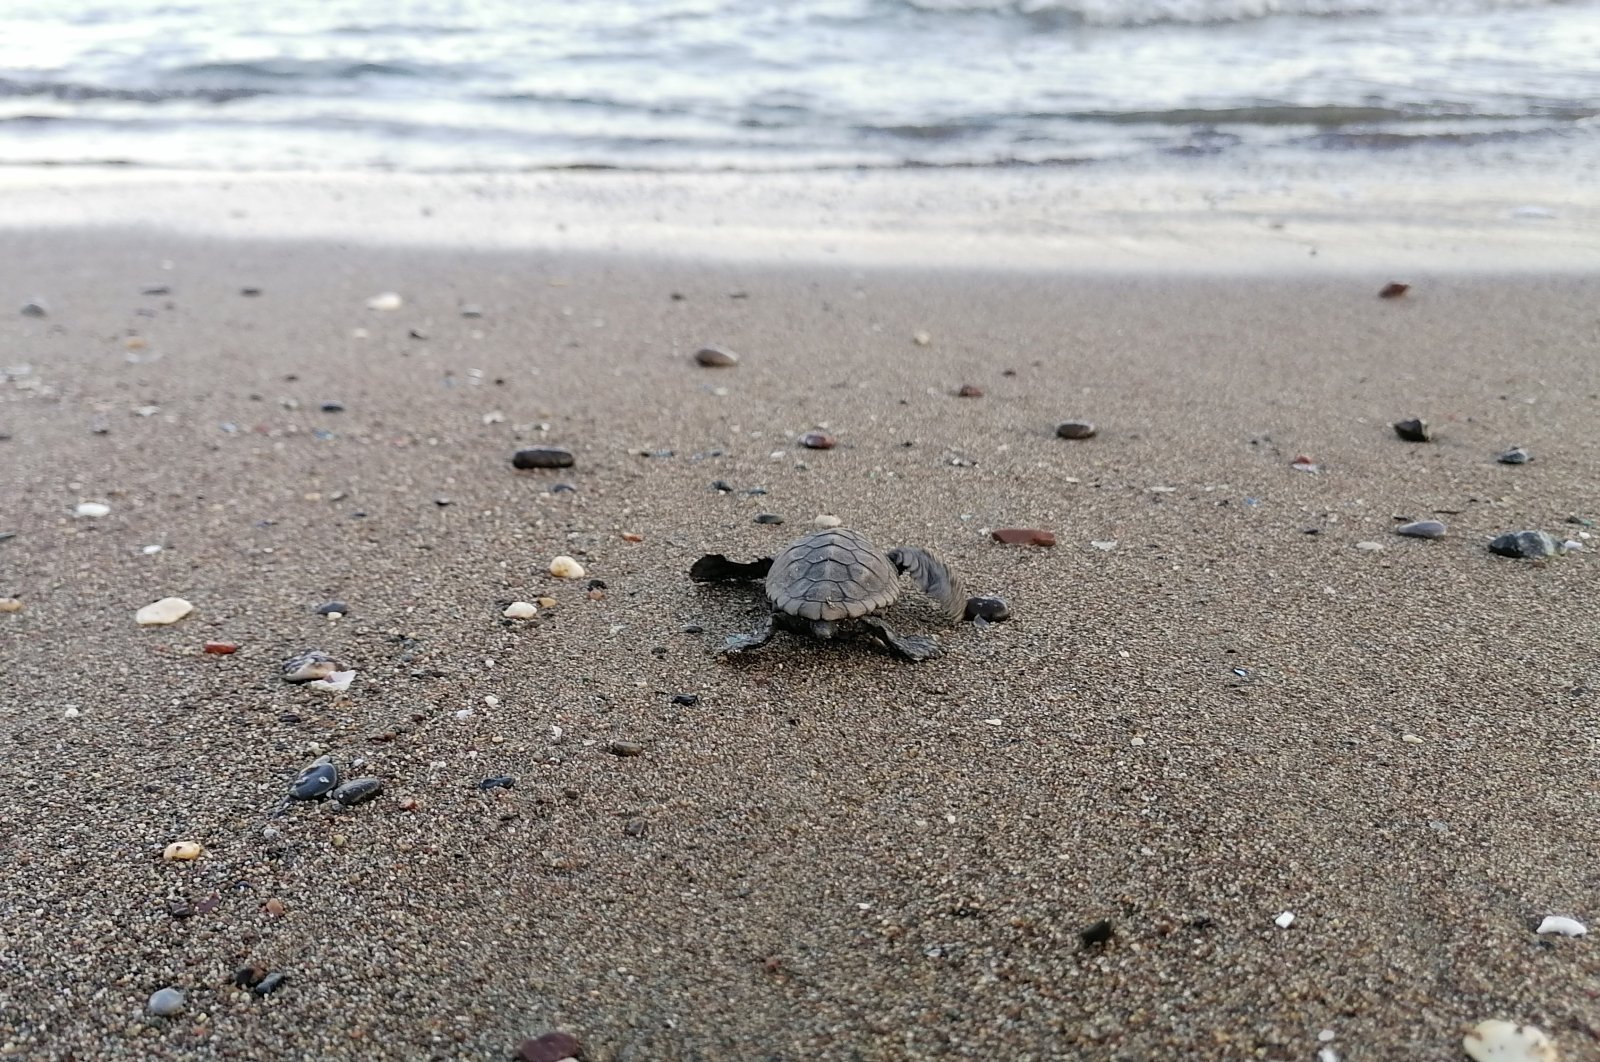 A baby turtle heads to sea on a beach in Mersin, southern Turkey, Aug. 7, 2020. (DHA Photo)